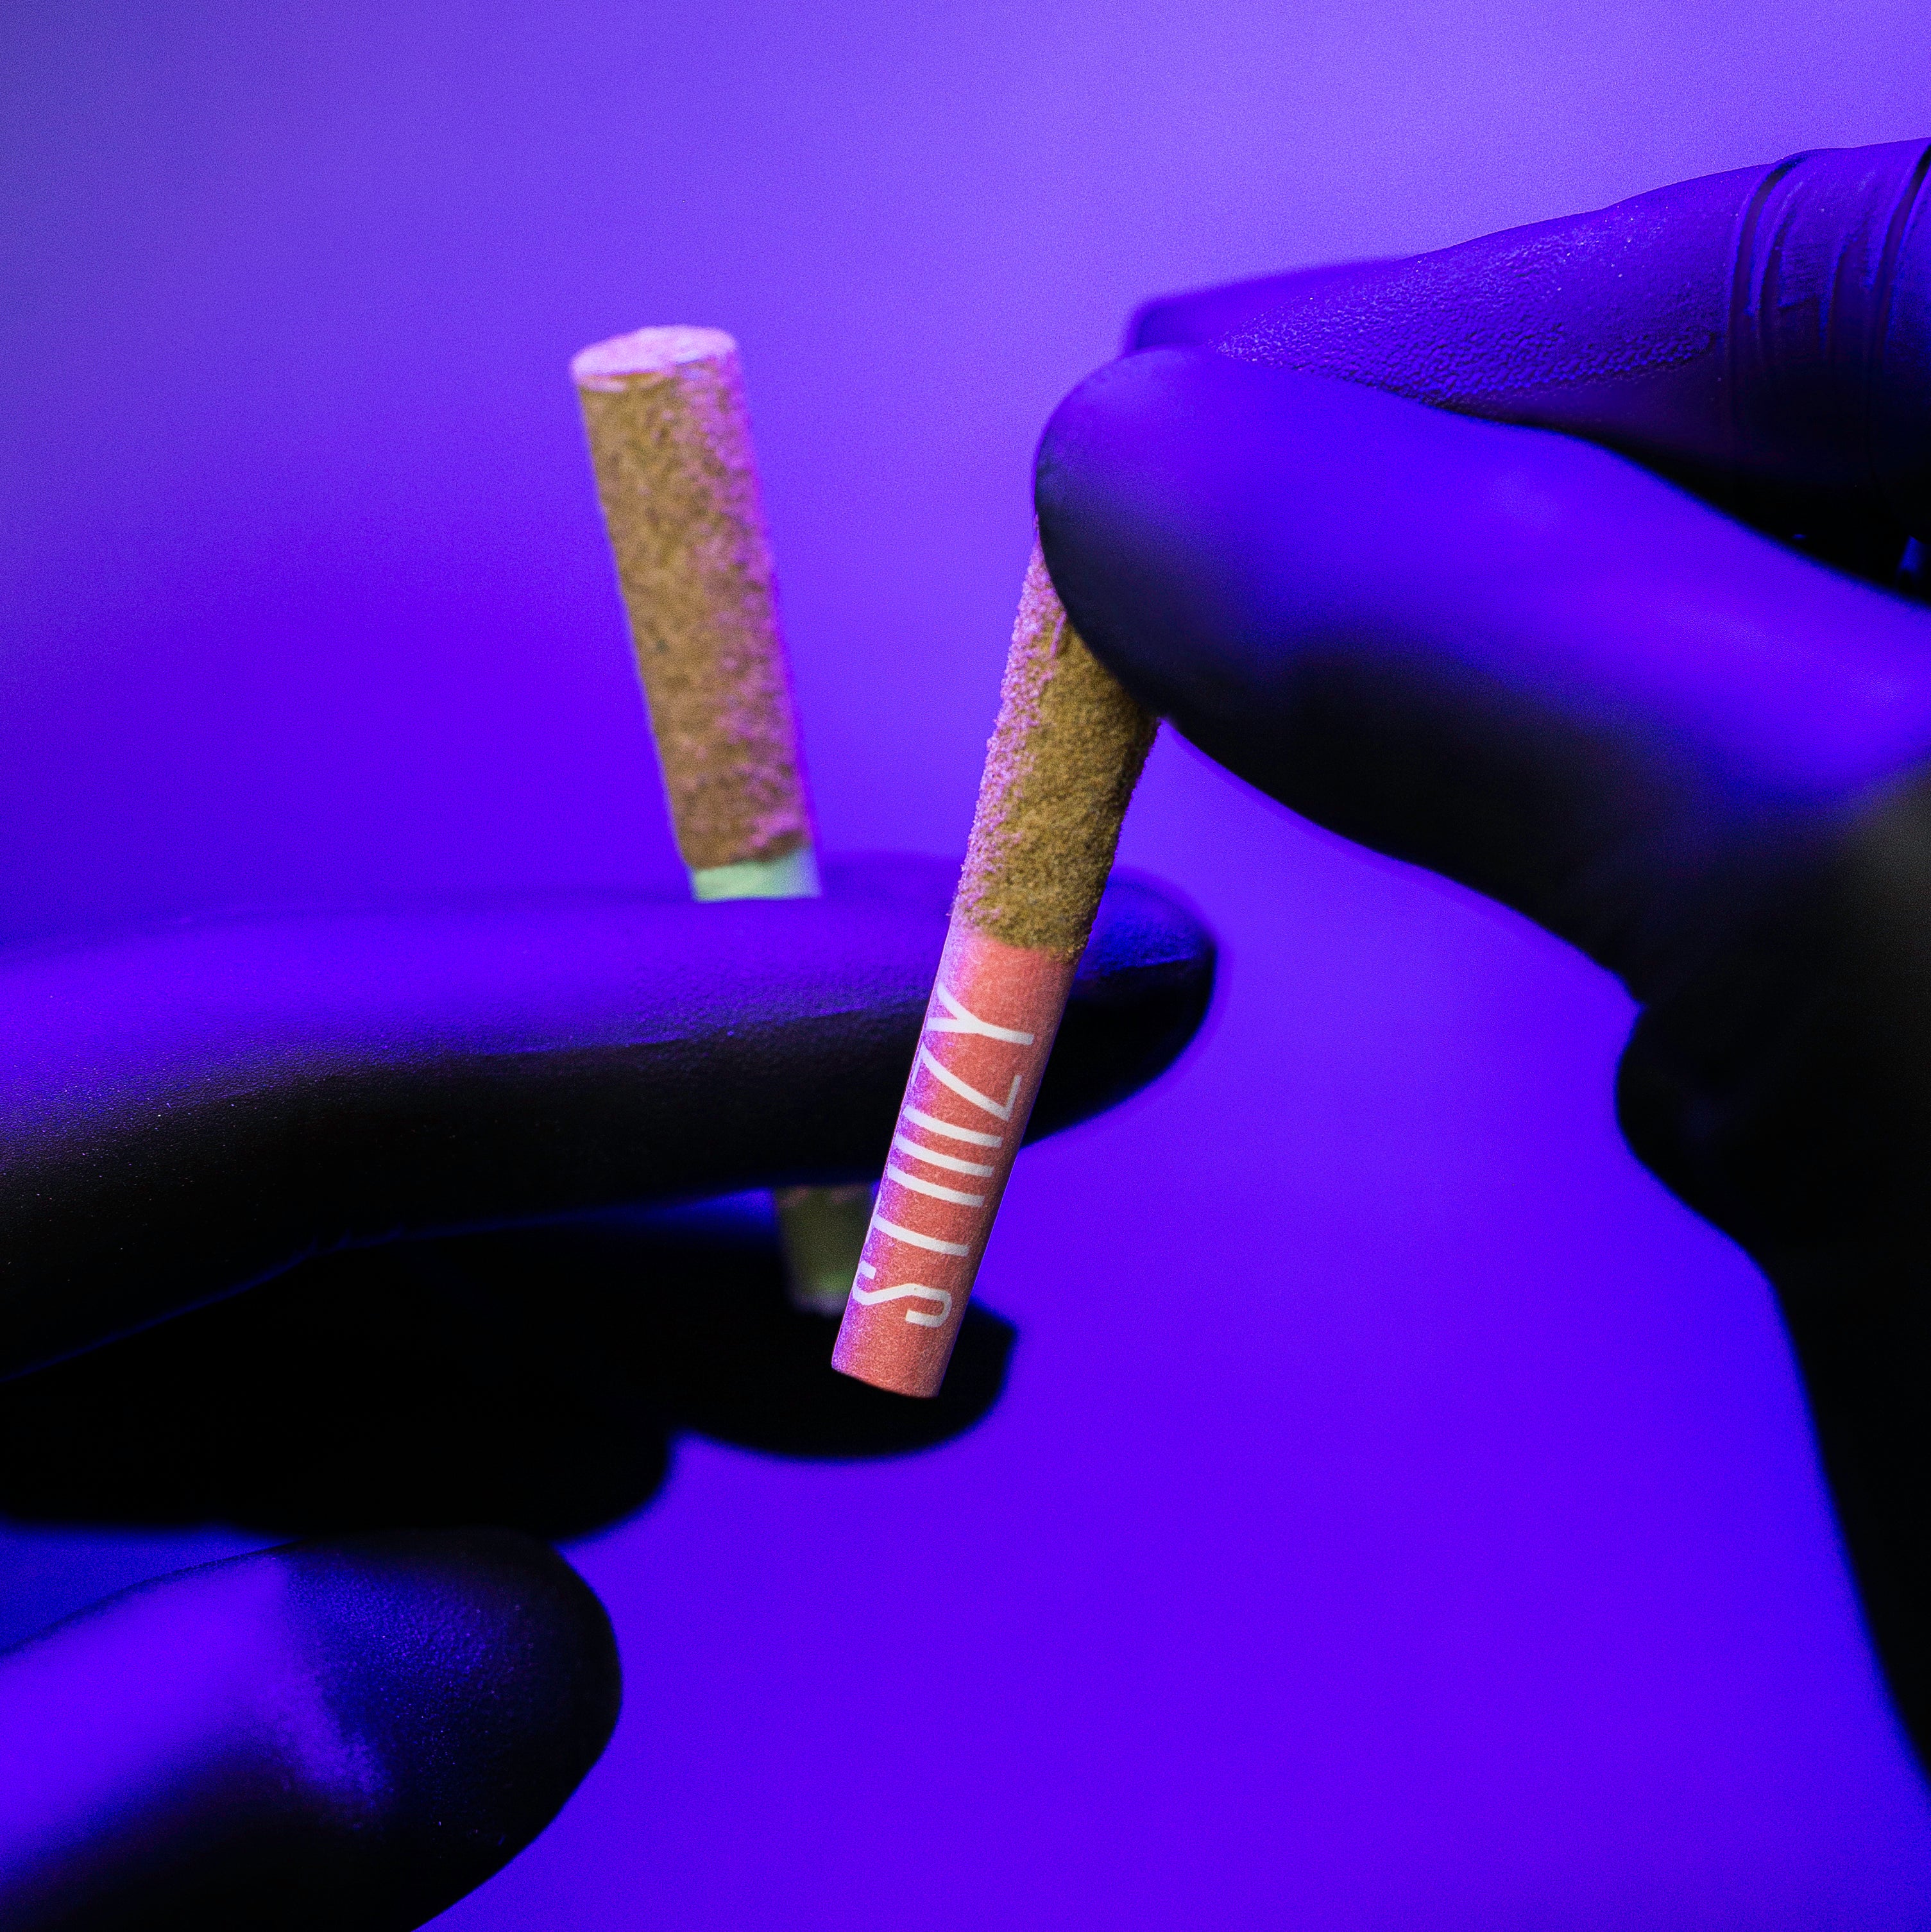 Two infused cannabis pre-rolls are being held up against a purple background by someone wearing purple gloves.